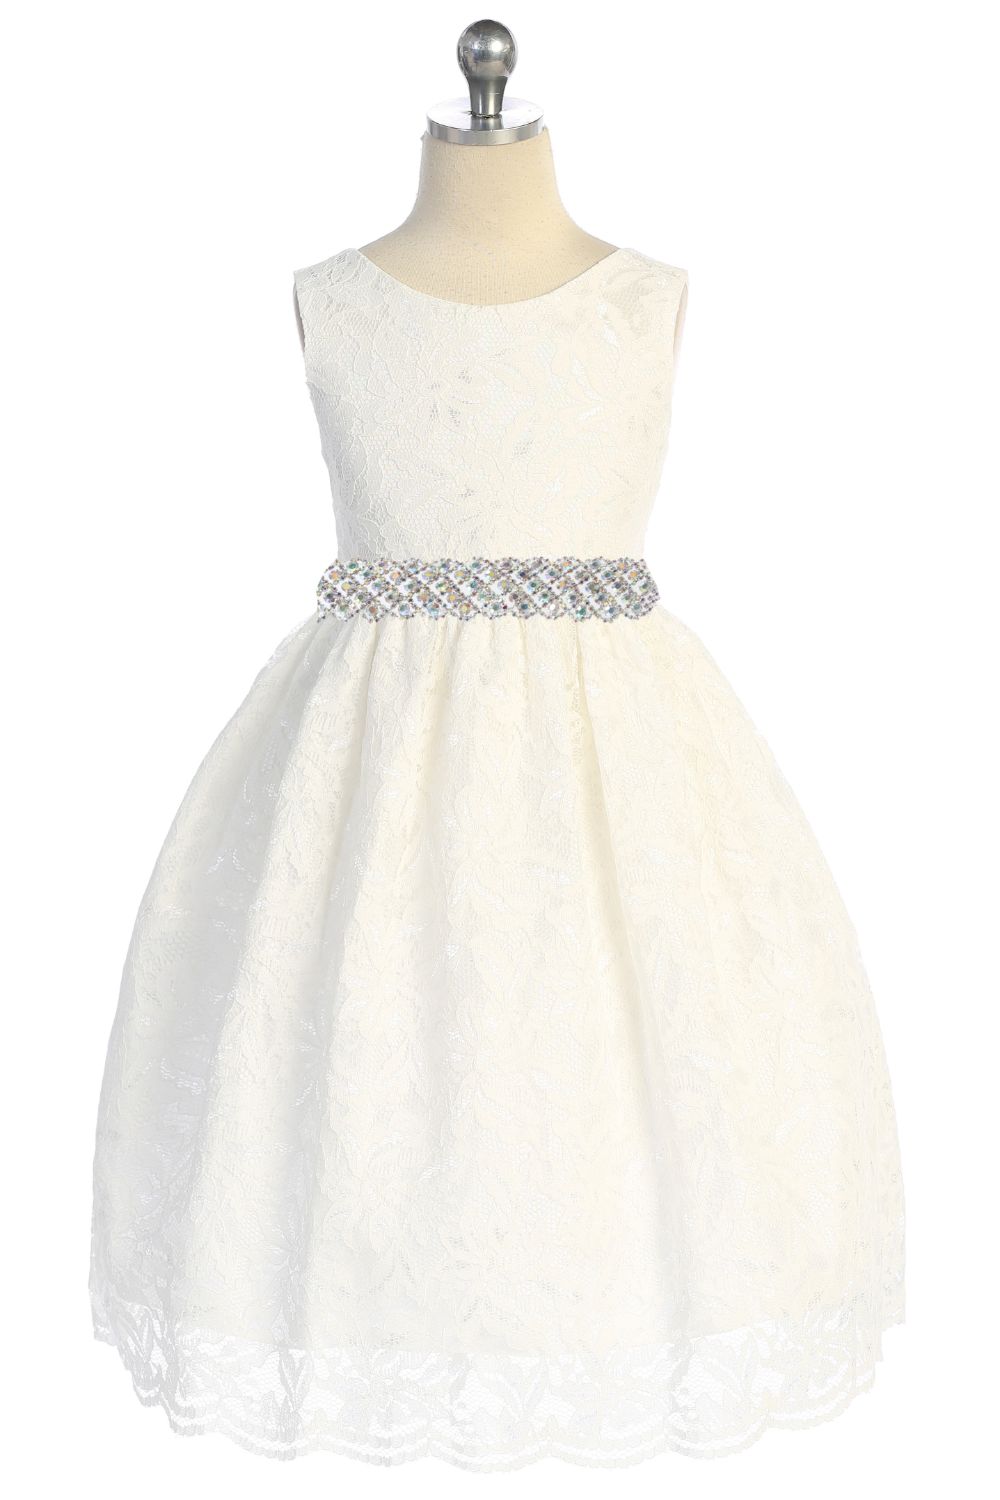 526-E All Lace Girls Dress with V Back & Bow and Thick Rhinestone Trim and Plus Sizes